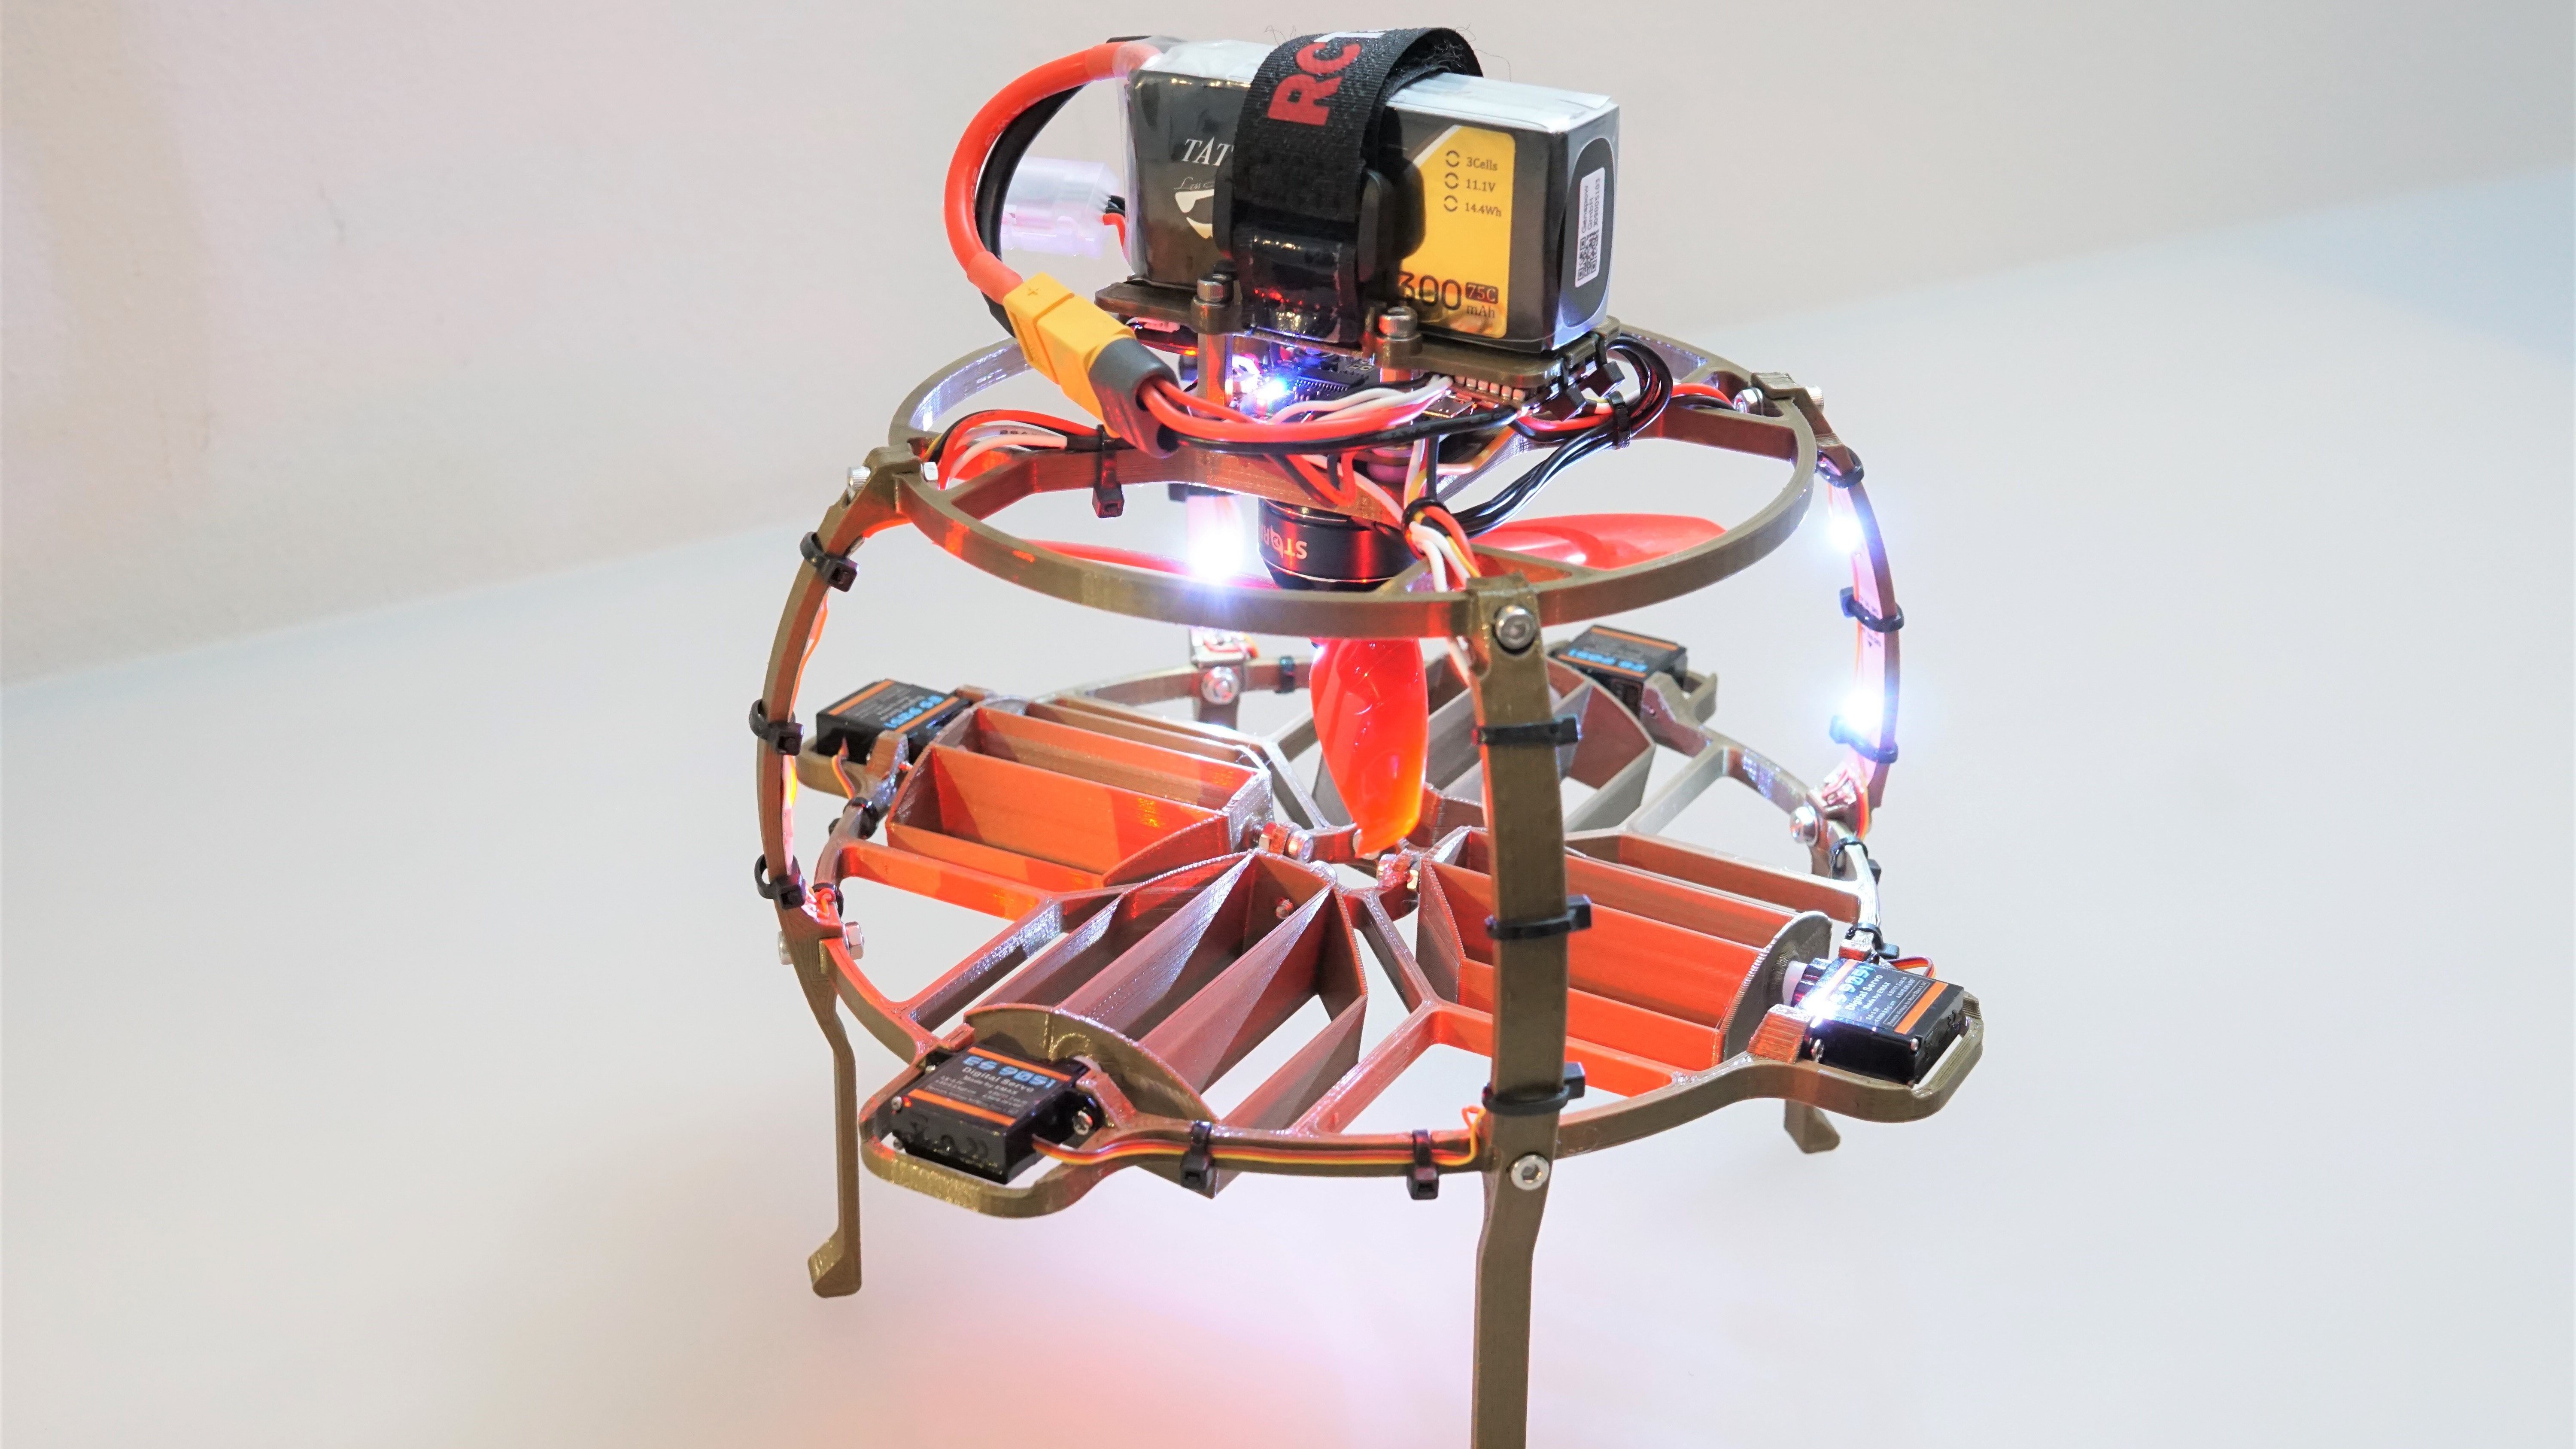 illoyalitet Sygeplejeskole Skæbne Flies Like A Quadcopter, But This Drone Design Has Only One Propeller |  Hackaday